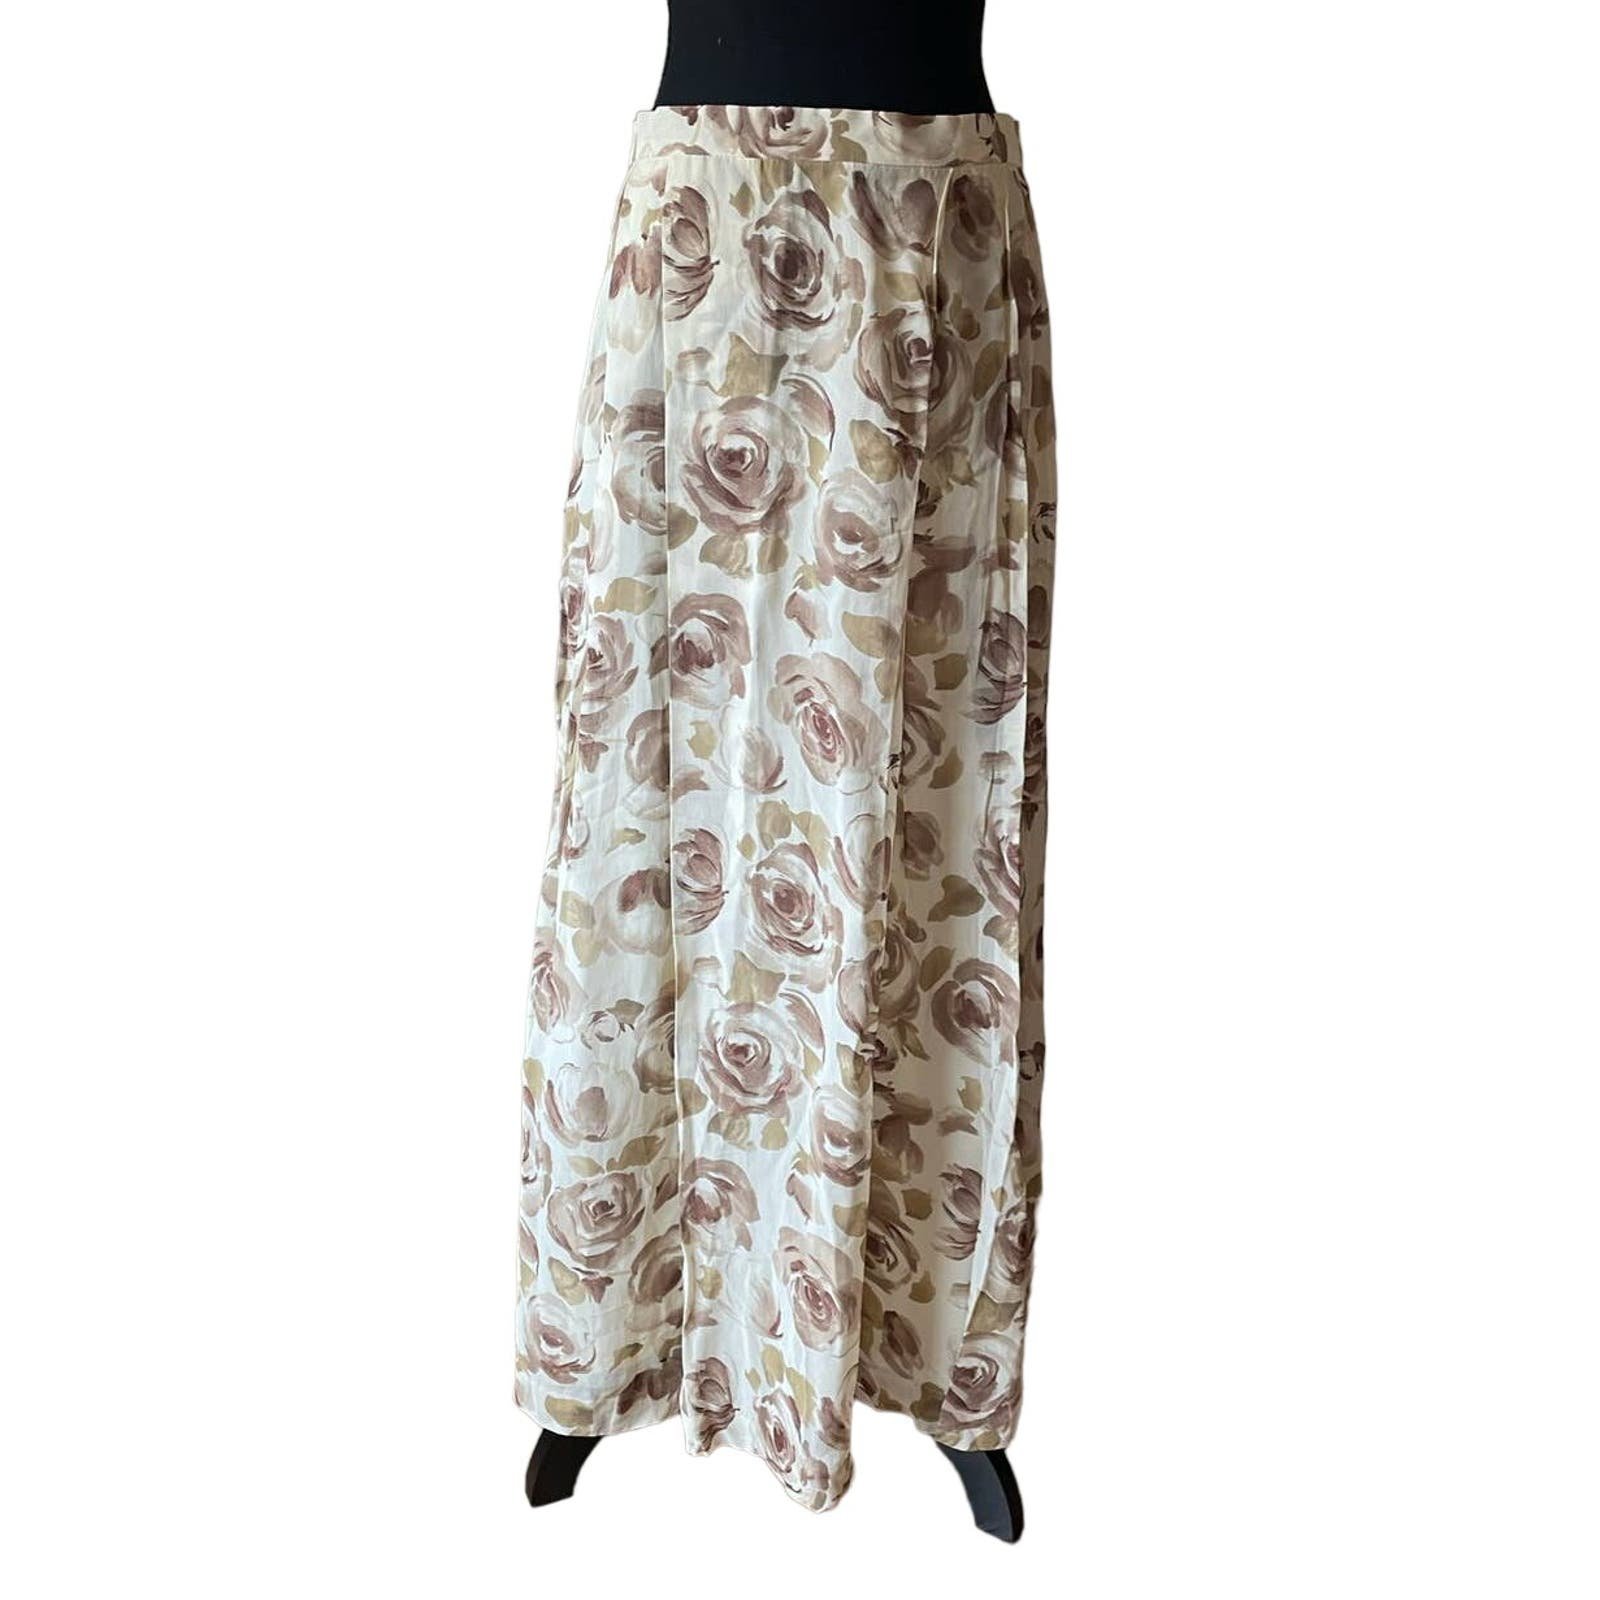 Authentic AUSTIN REED Cream Brown Flower Pattern Maxi S